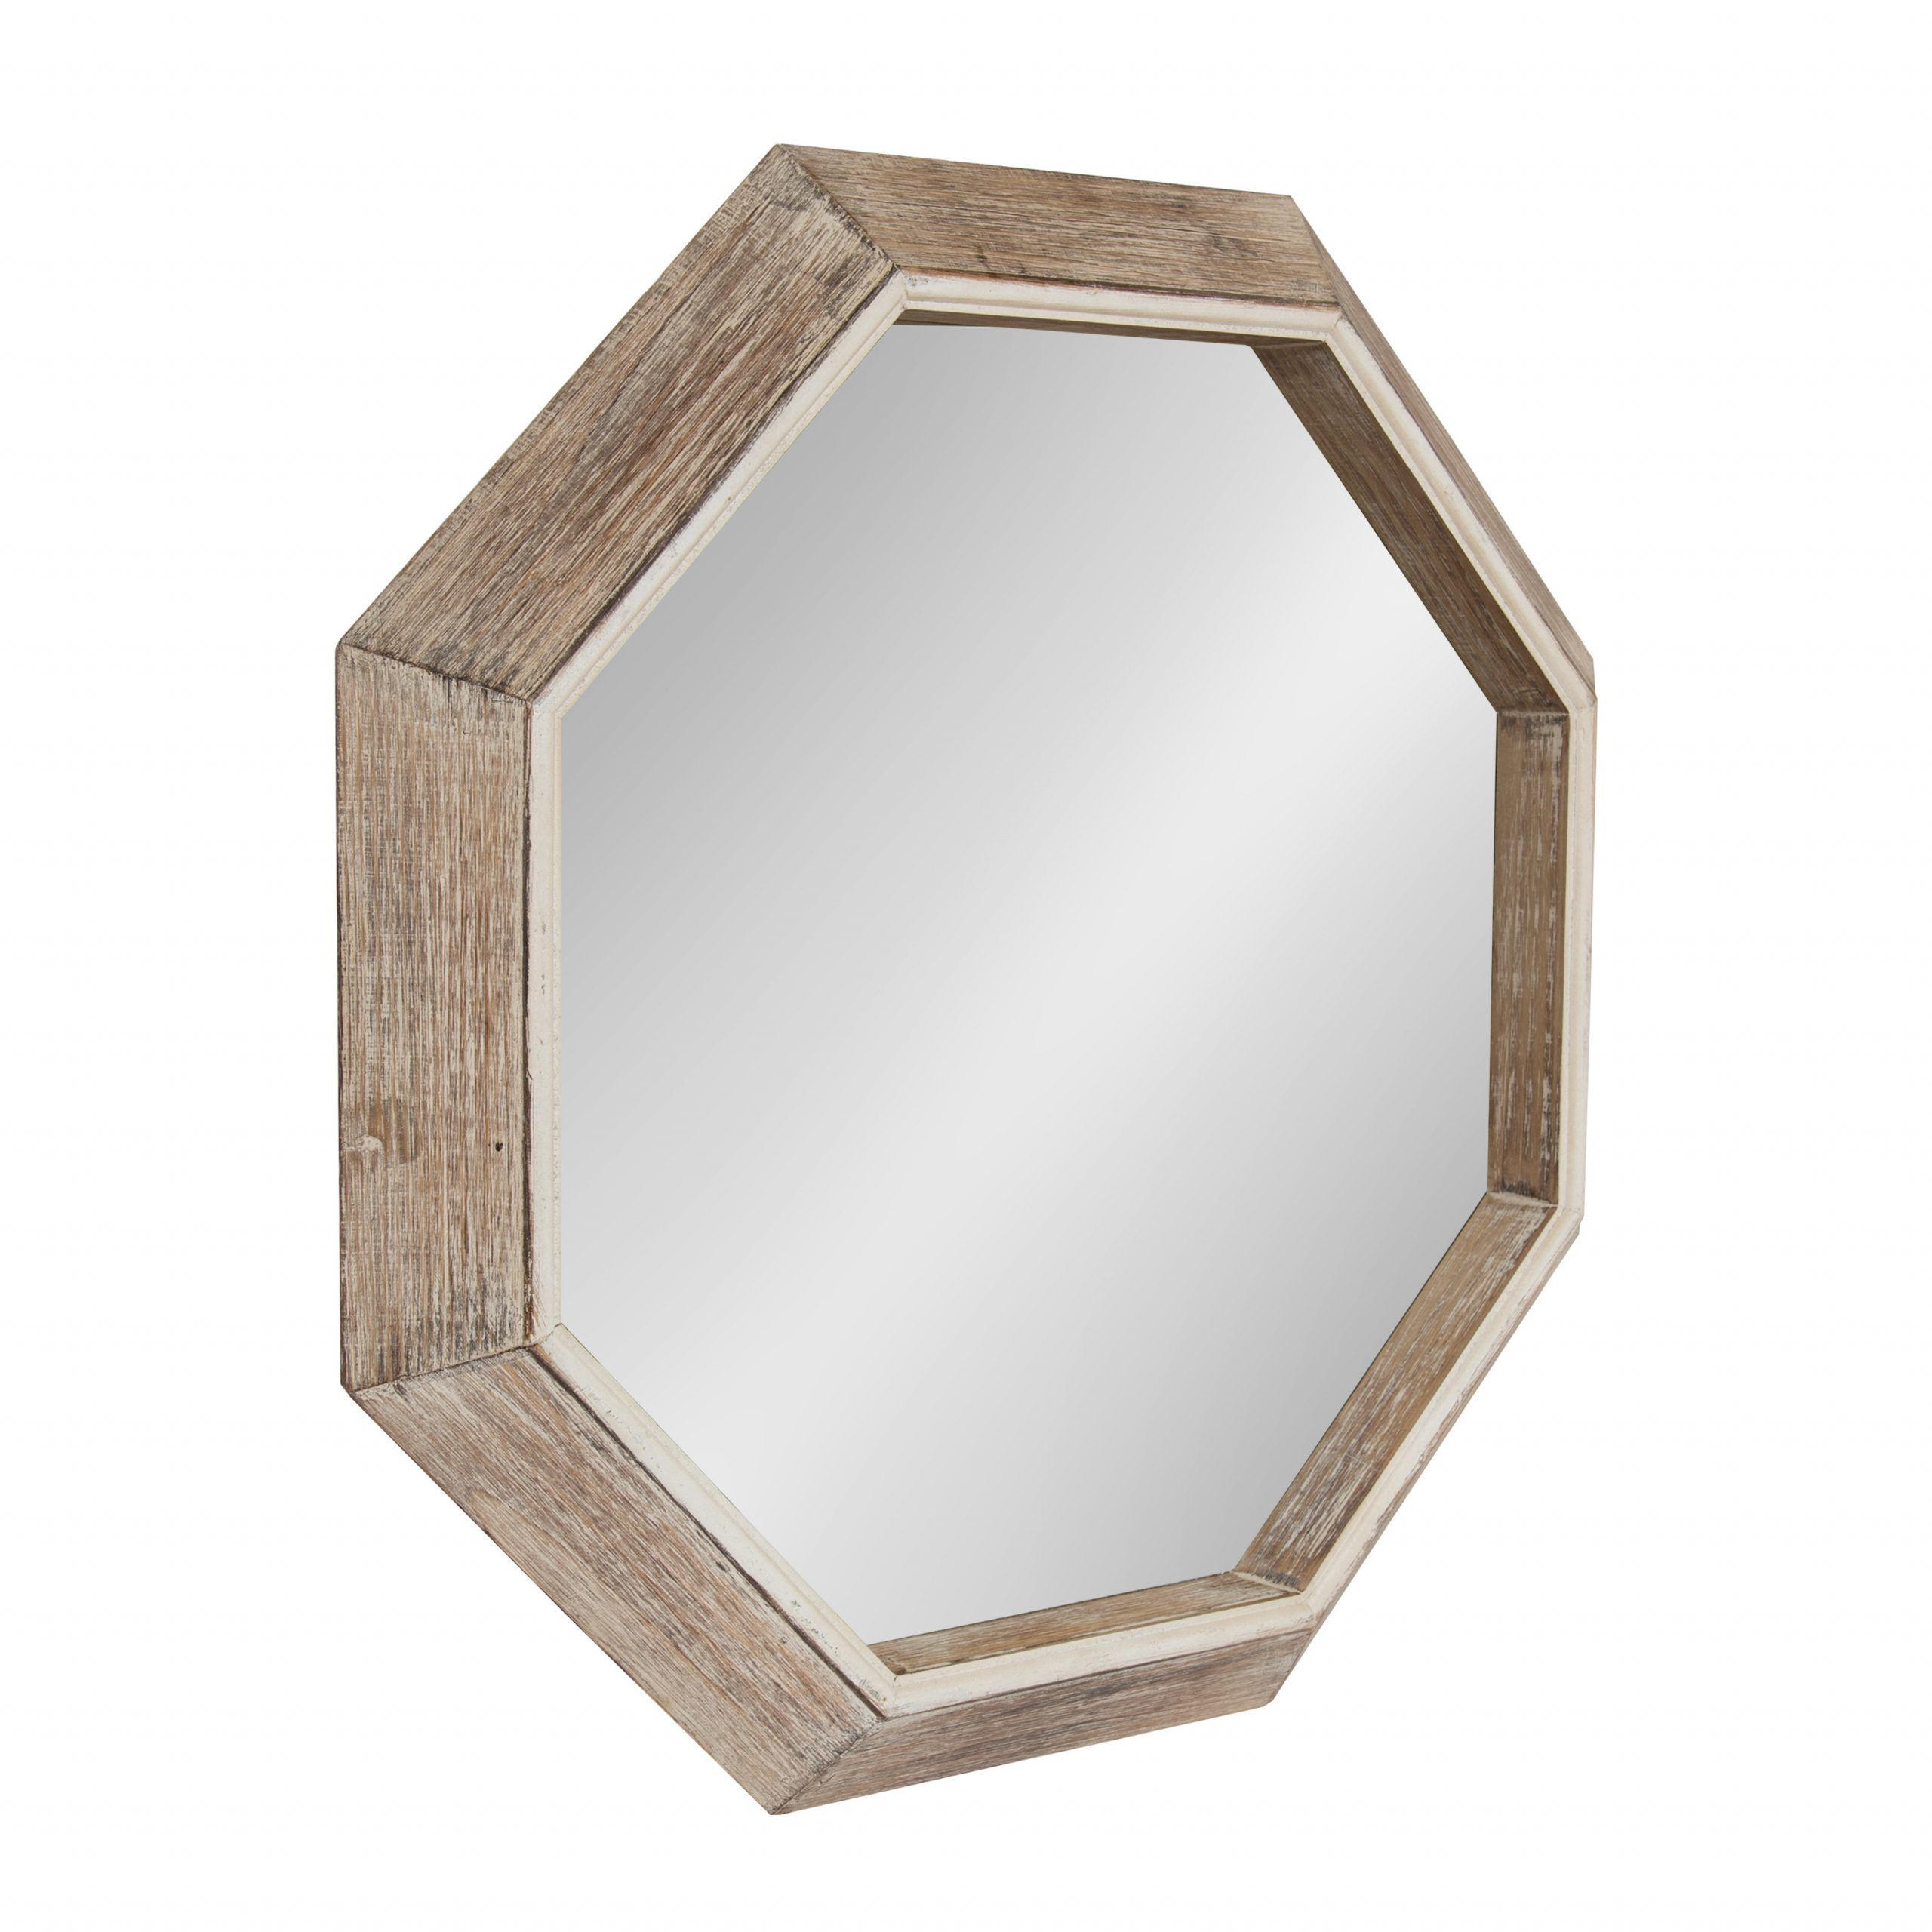 Kate And Laurel – Yves Large Rustic Wooden Octagon Wall Mirror, White Within Matte Black Octagonal Wall Mirrors (View 8 of 15)